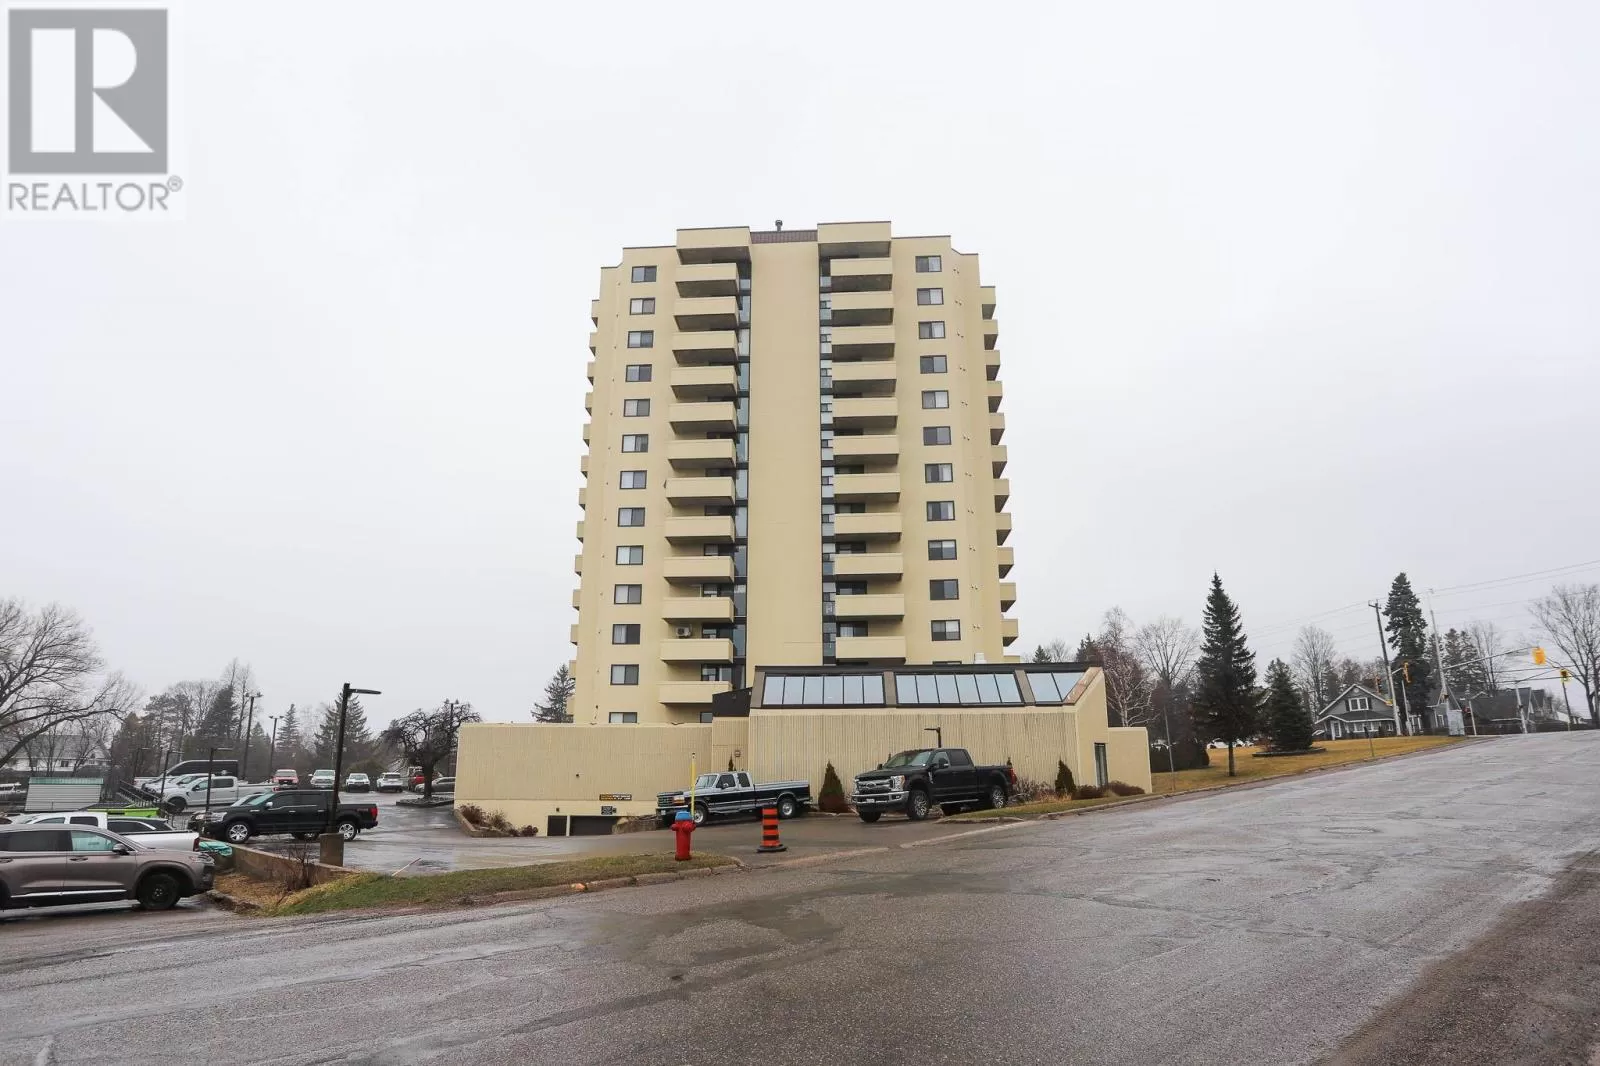 Apartment for rent: 1139 Queen St # 1106, Sault Ste. Marie, Ontario P6A 6K5